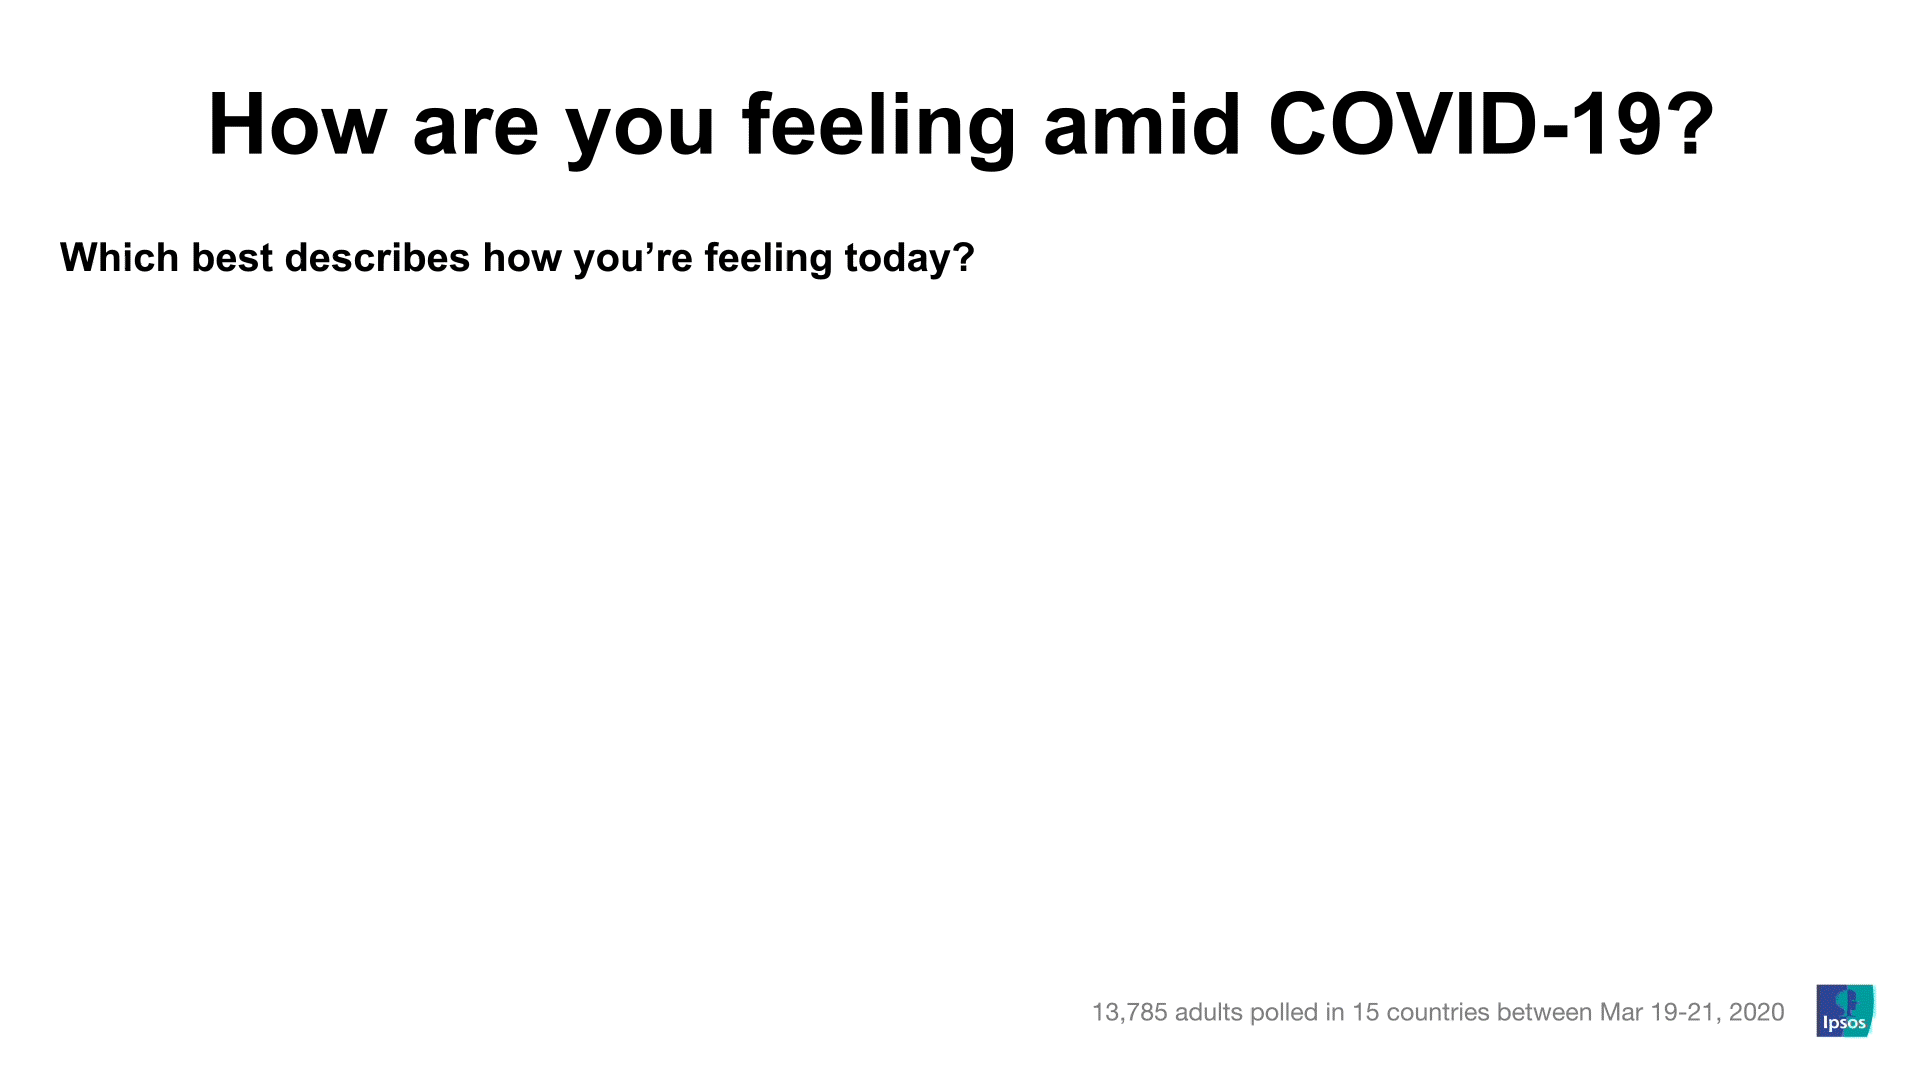 How are you feeling amid Covid-19? which best describe how you're feeling today? | Ipsos | Coronavirus pandemic | self-isolation